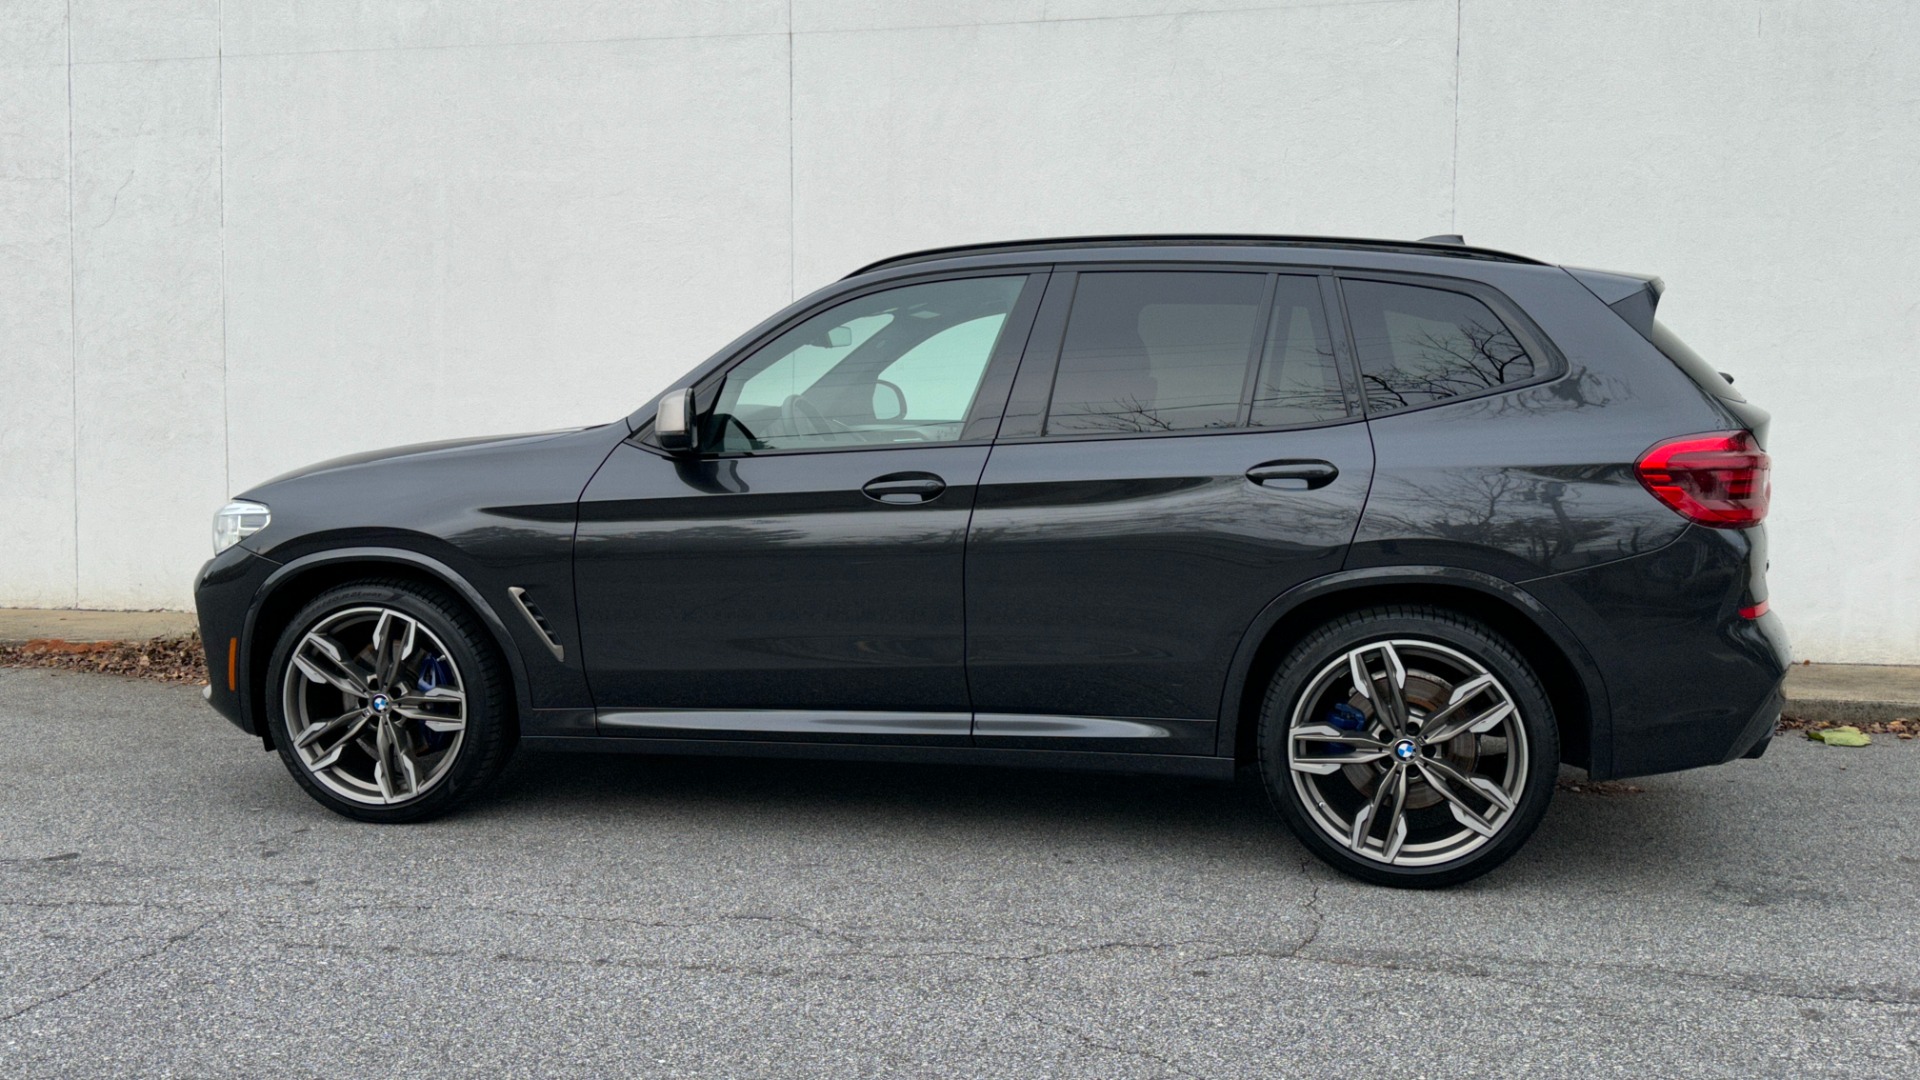 Used 2019 BMW X3 M40i / 21IN WHEELS / HEATED SEATS / NAVIGATION / HEATED STEERING for sale $44,995 at Formula Imports in Charlotte NC 28227 6